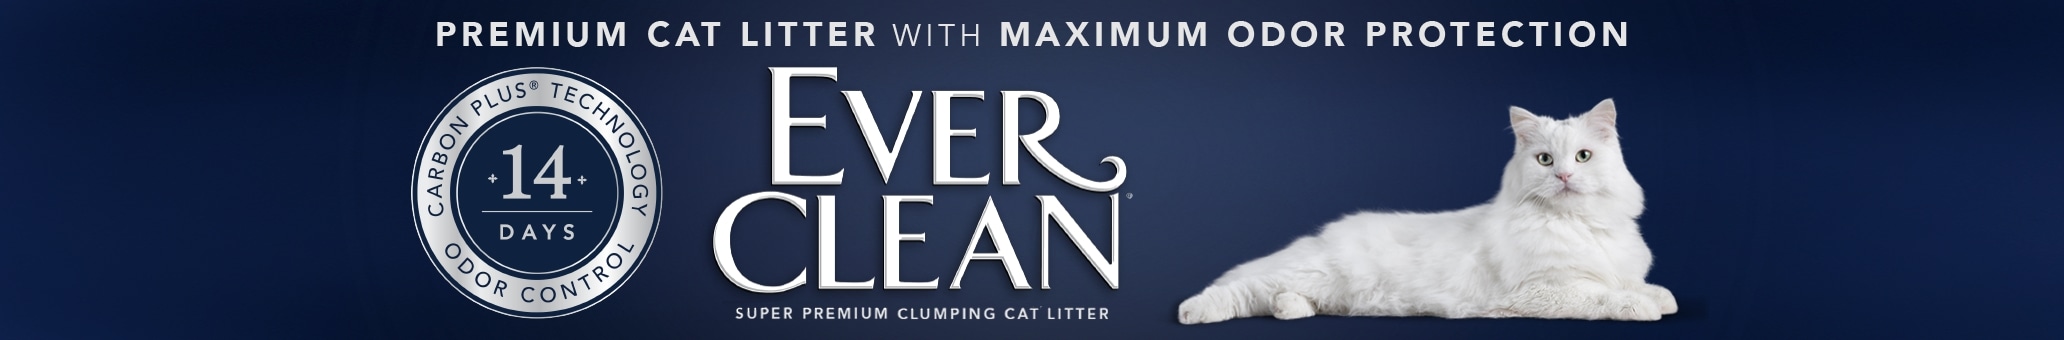 ever-clean-brand-banner